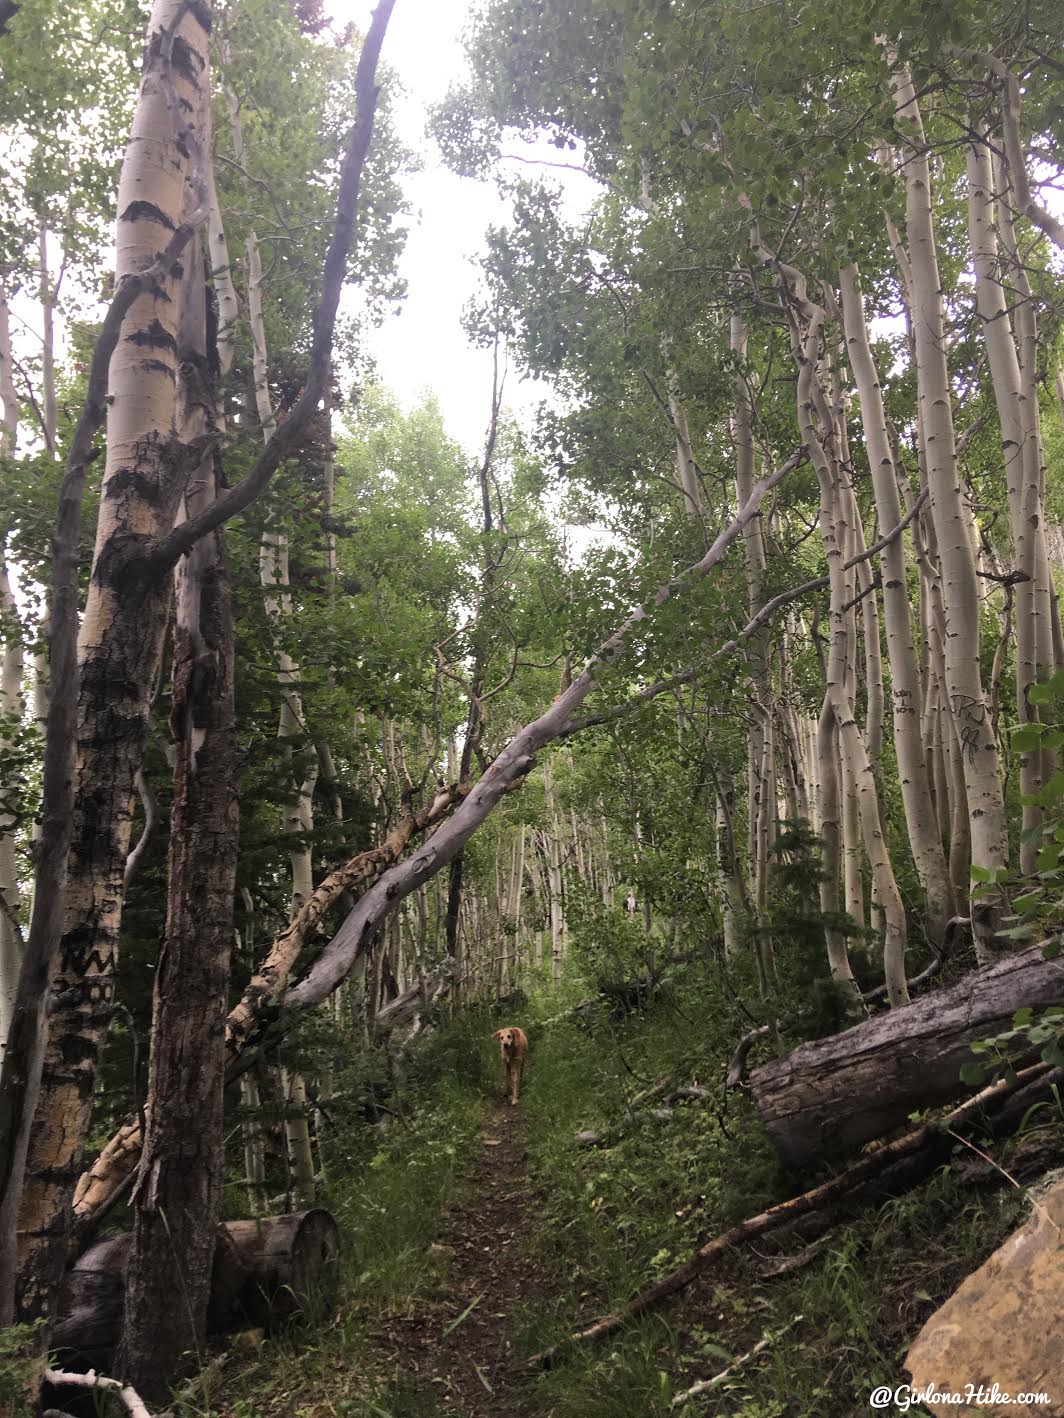 Hiking to East Mountain, Emery County High Point